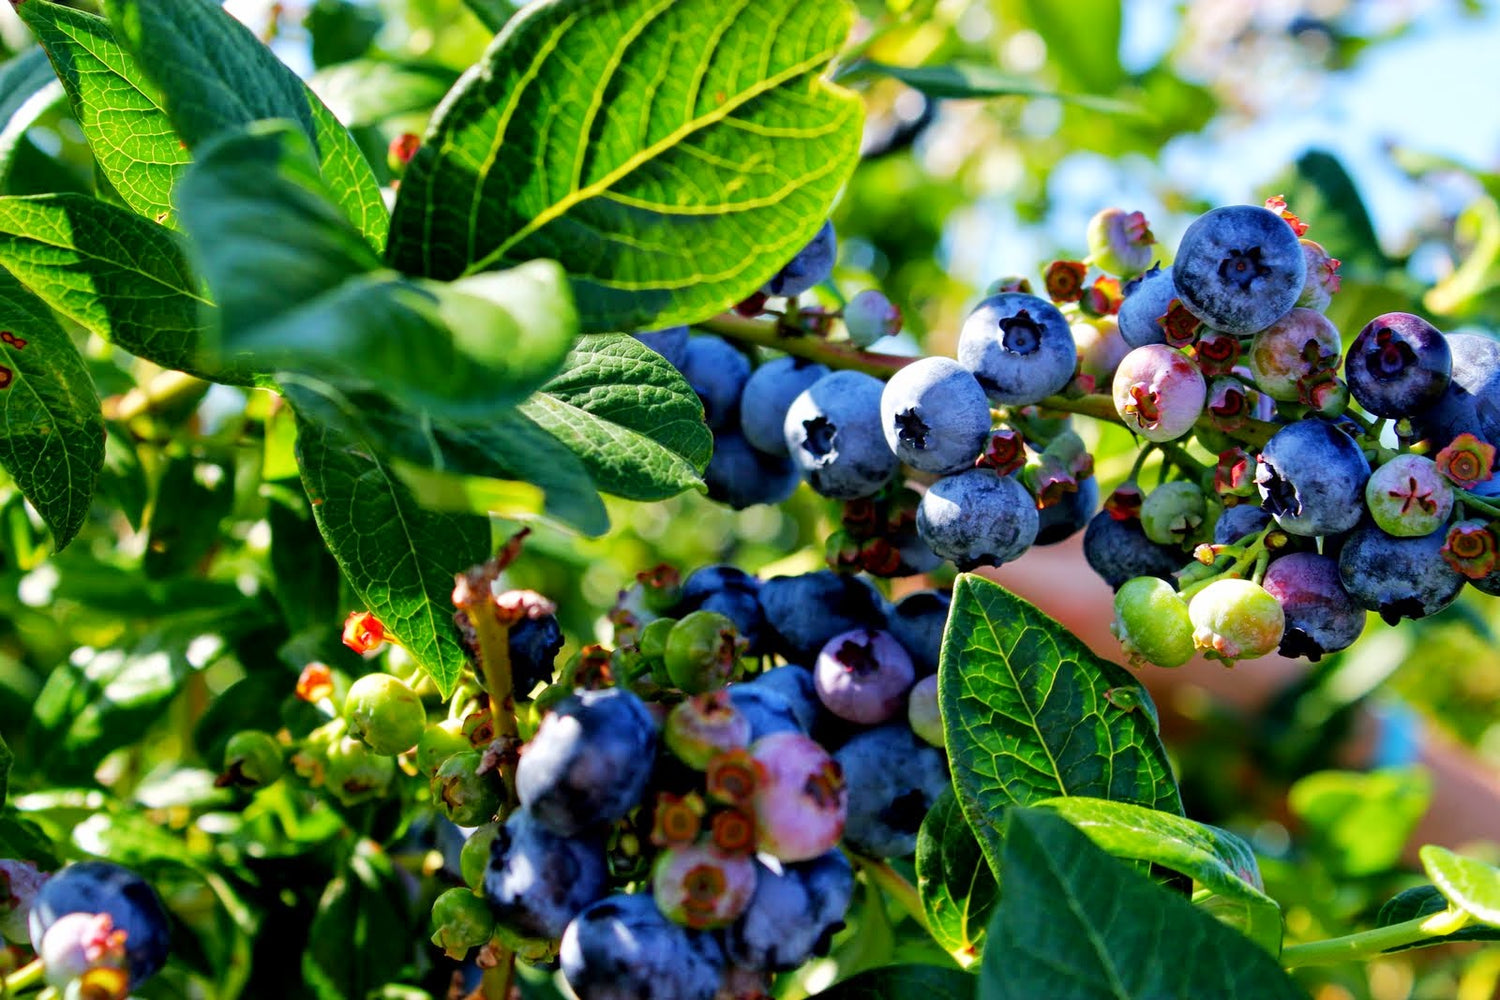 Blueberry plant - A photo of a shrub-like plant with woody stems and small, oval-shaped leaves. The plant typically features clusters of small, bell-shaped flowers that are pink or white in color, which later develop into small, round berries. The berries are usually blue or purple in color and have a sweet and tangy taste. 